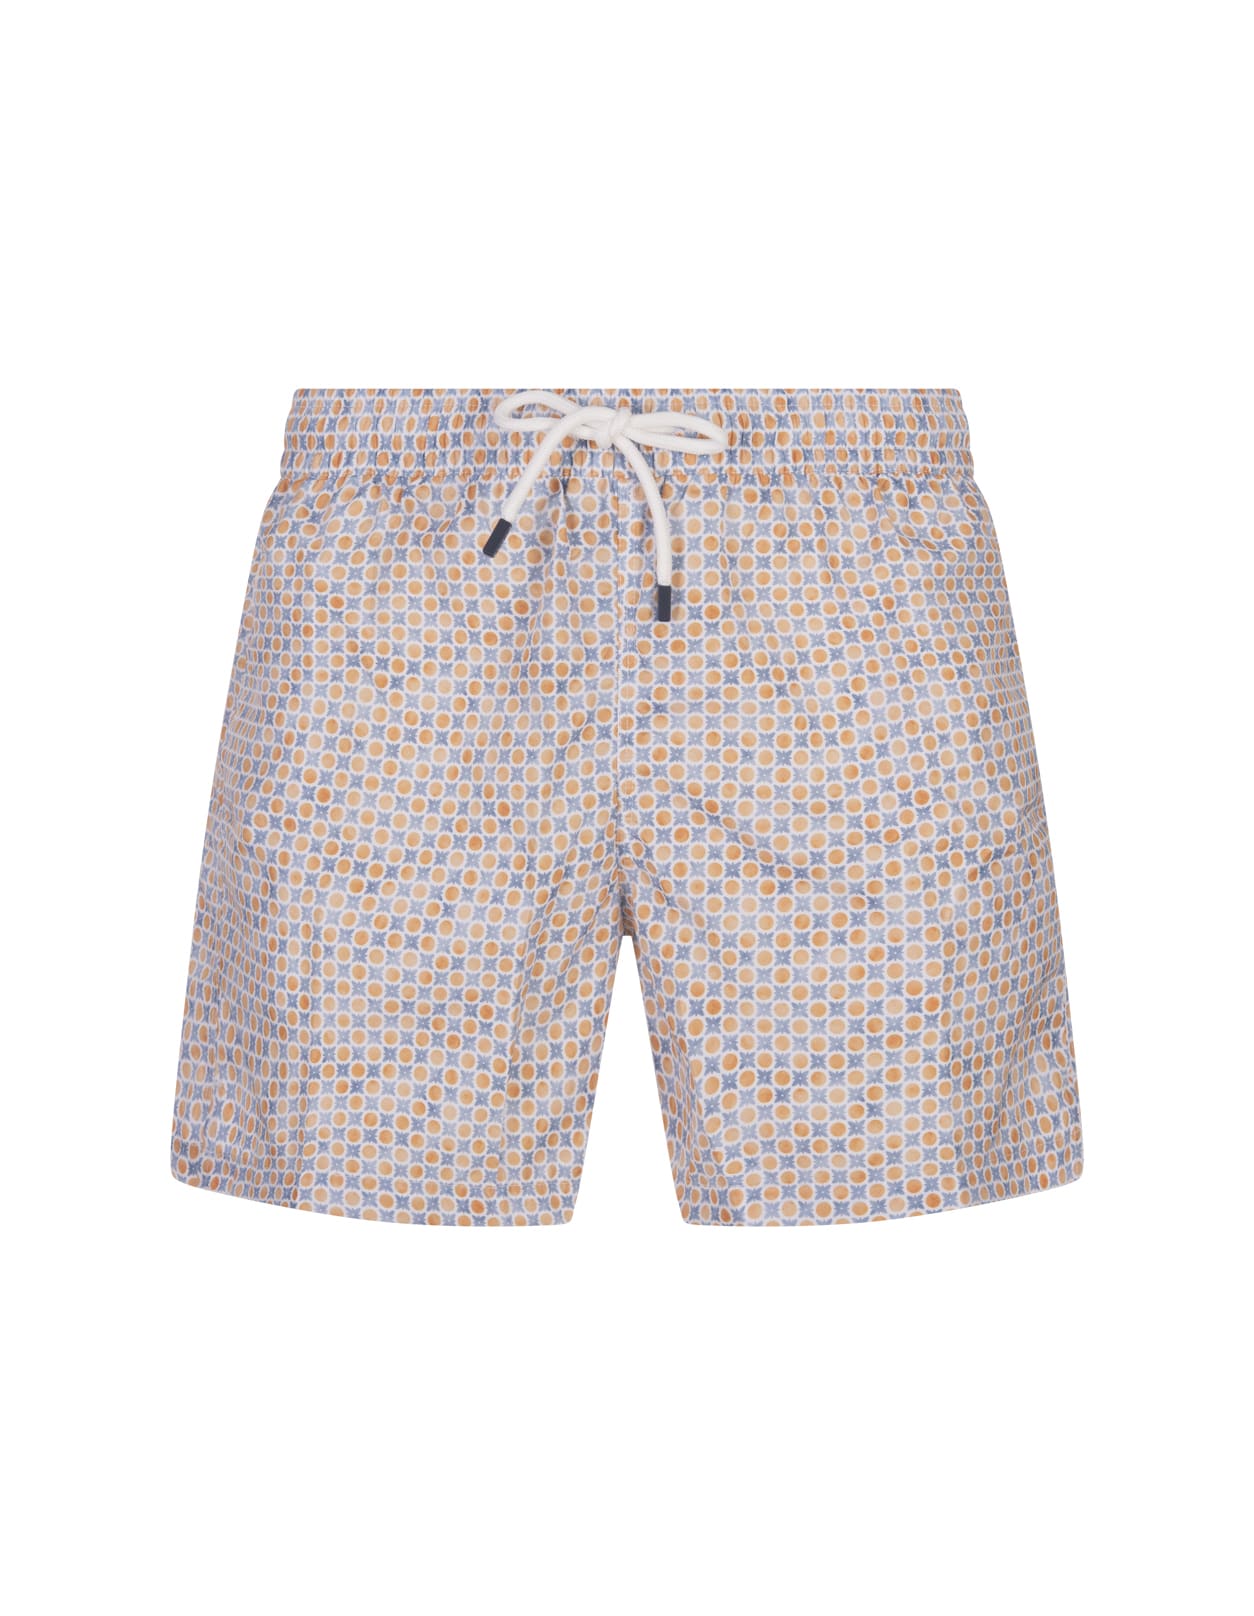 Fedeli Swim Shorts With Micro Pattern Of Polka Dots And Flowers In Orange